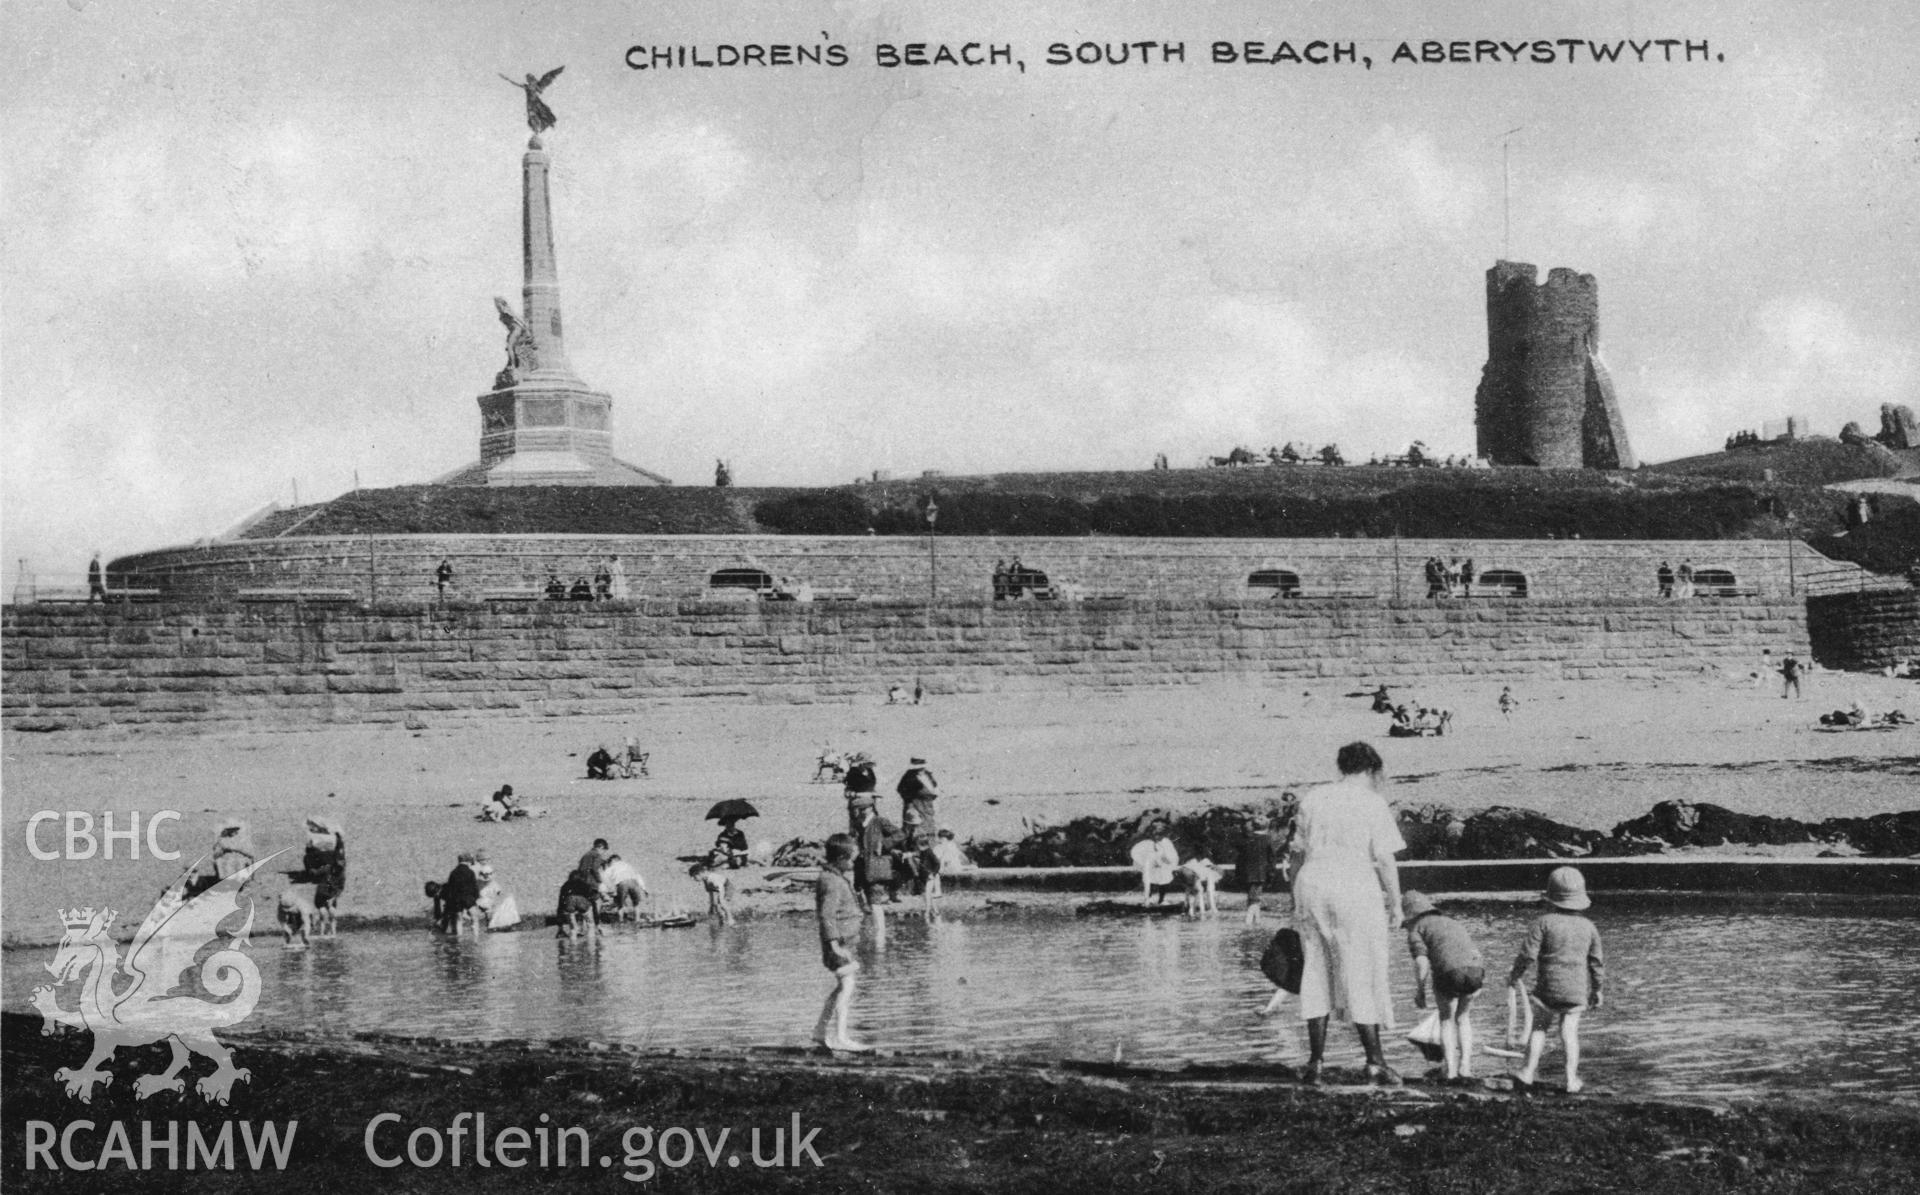 Digital copy of postcard showing Children's Beach, South Beach, Aberystwyth, dated 1926 .  Loaned for copying by Charlie Downes.